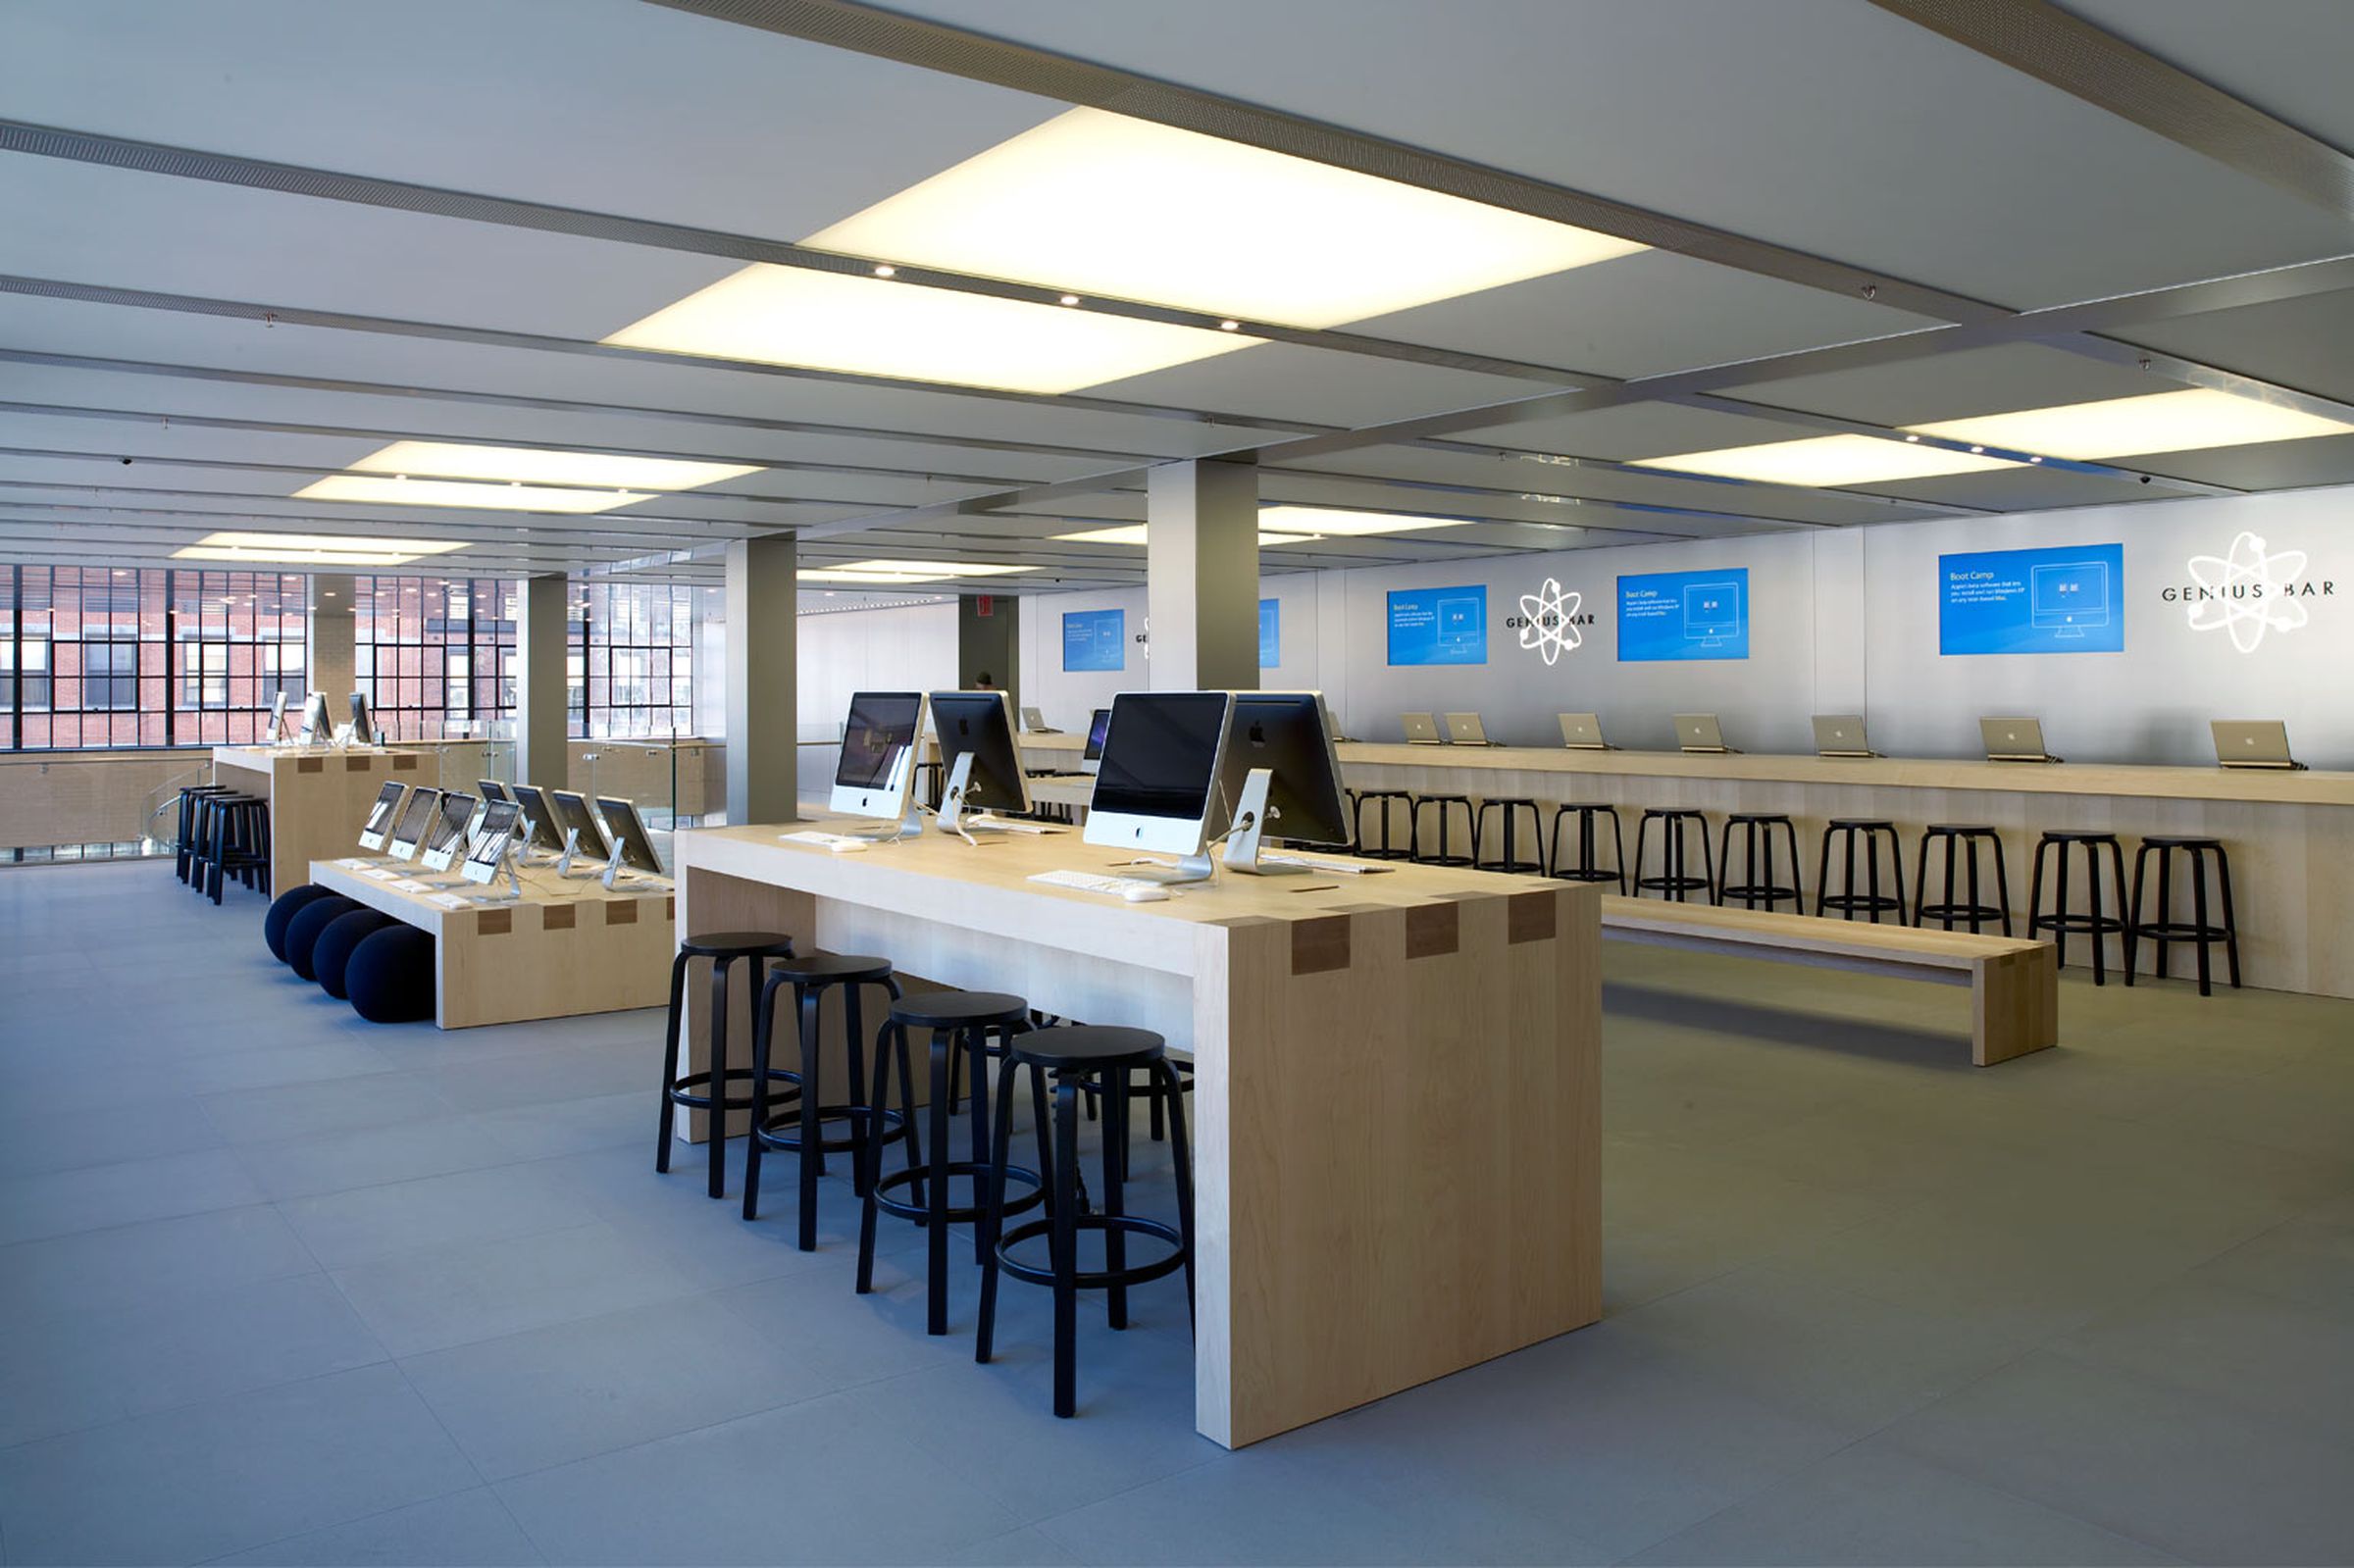 NYC Apple Stores in historic buildings